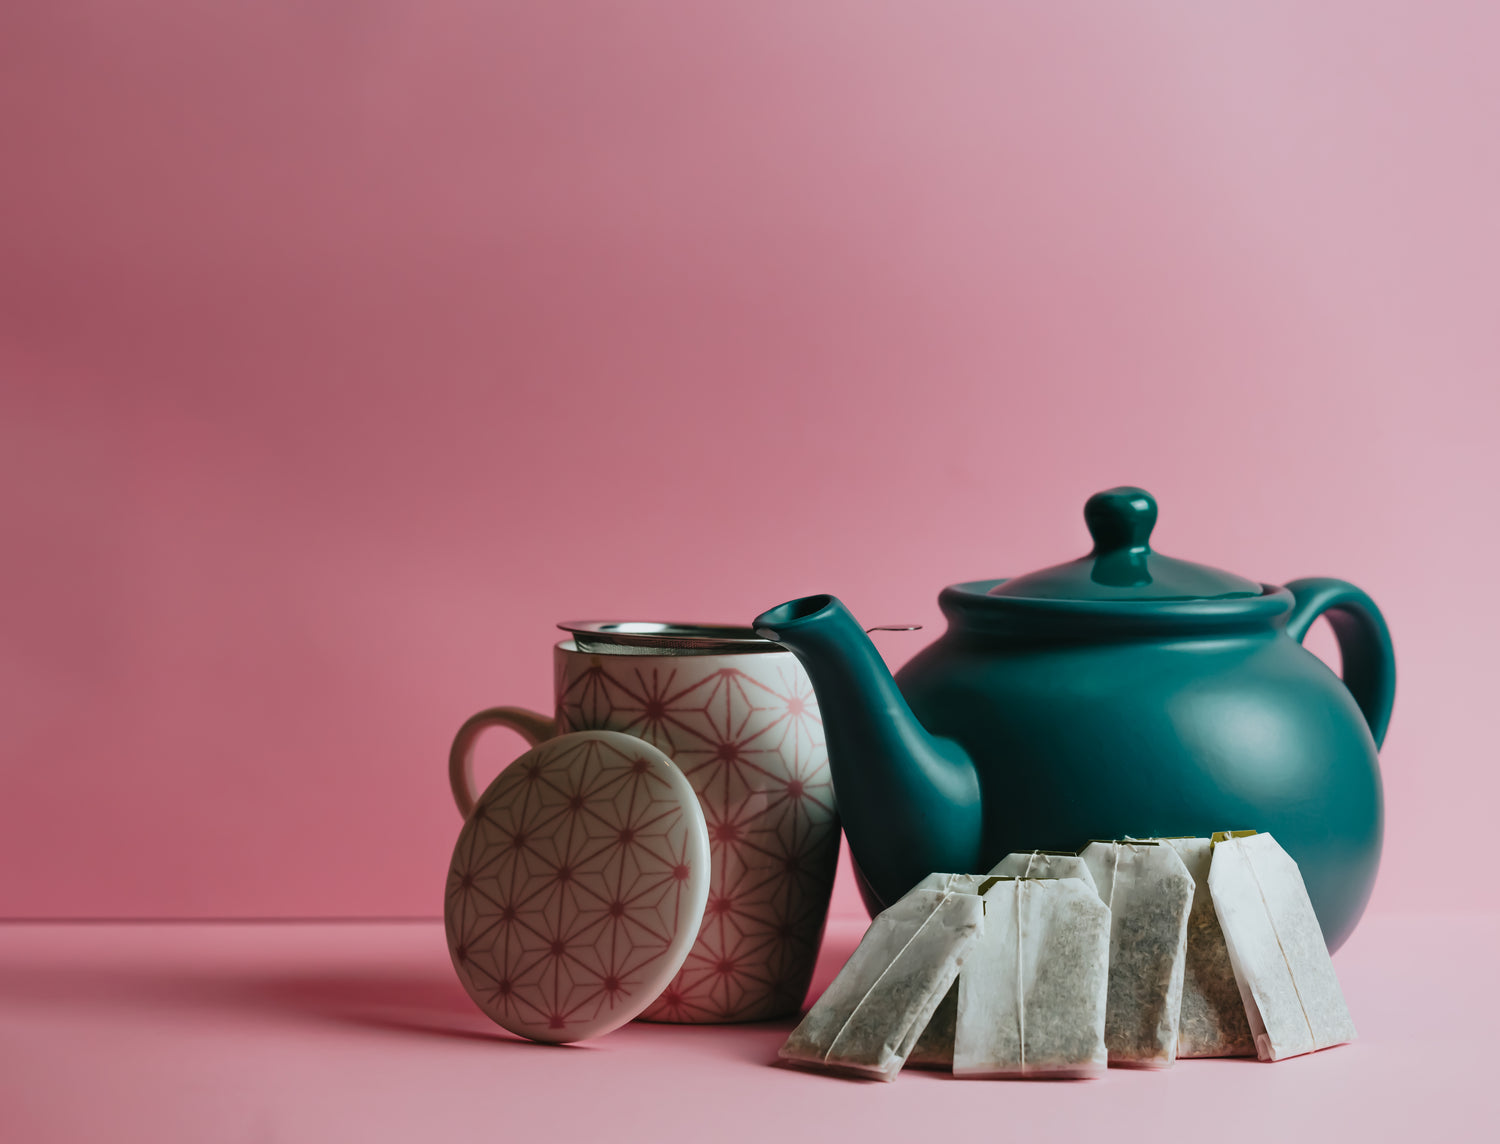 On a plain pink backgrounds sits a green ceramic teapot alongside a cup, and 5 teabags.